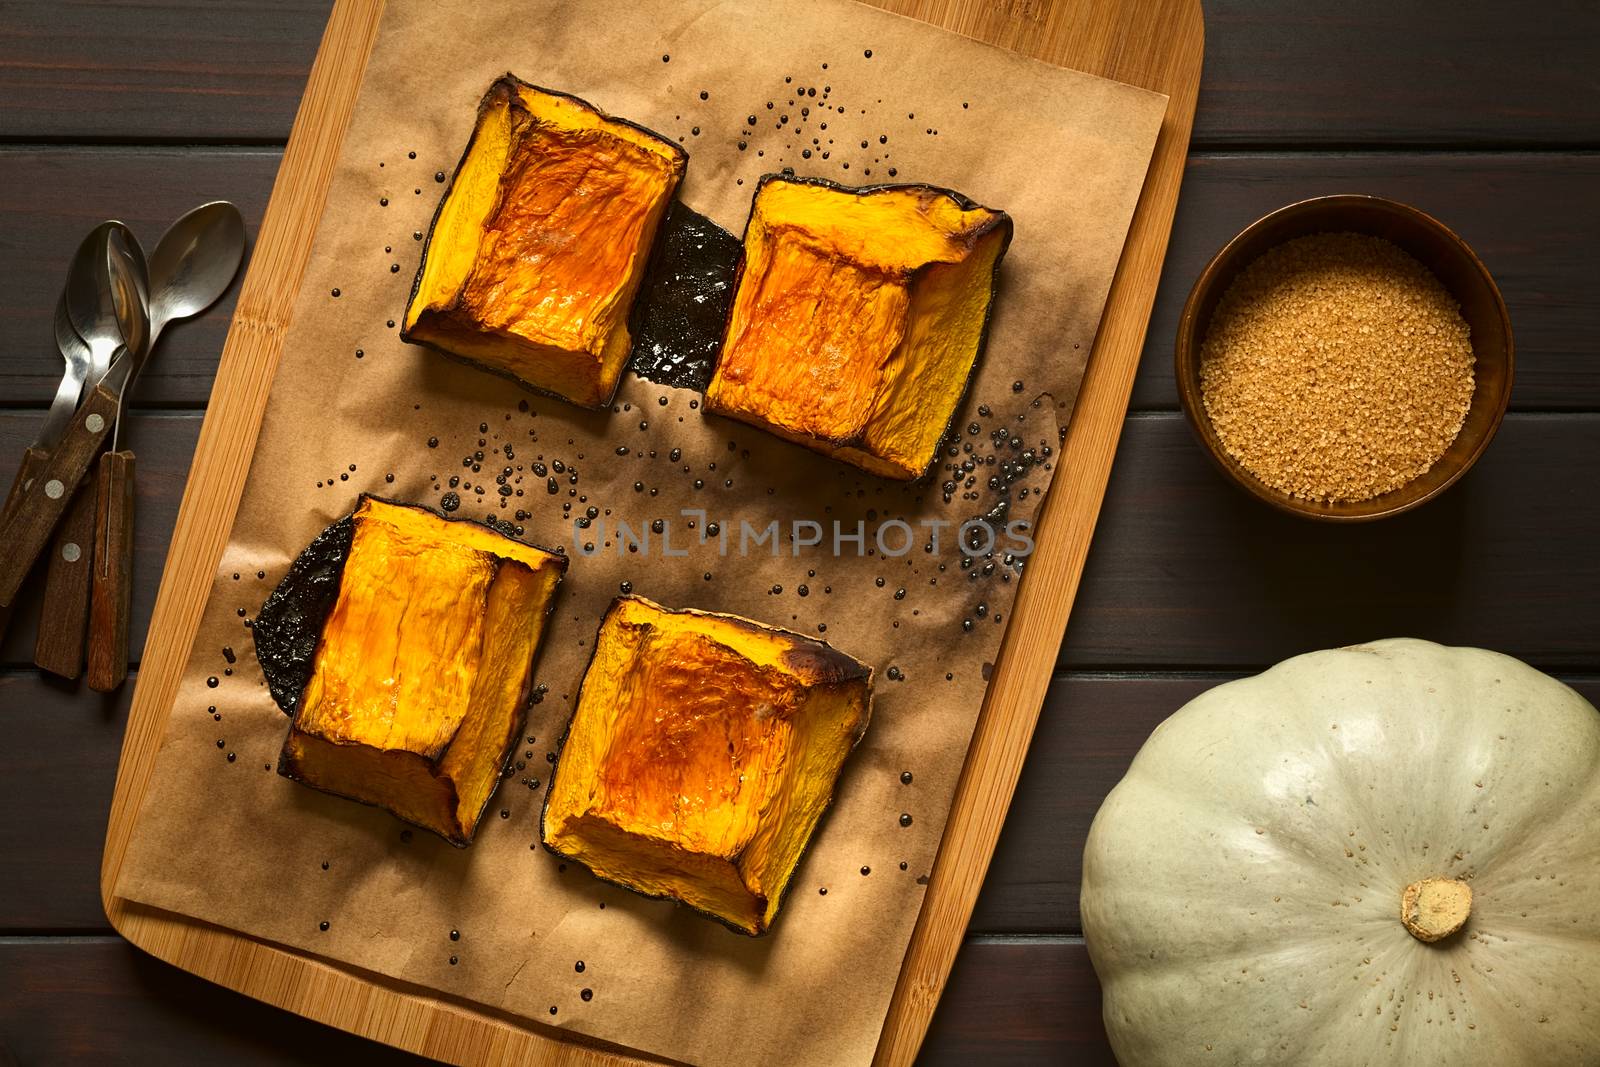 Baked pumkin pieces with caramelized sugar on top, a traditional autumn snack in Hungary, photographed overhead on dark wood with natural light